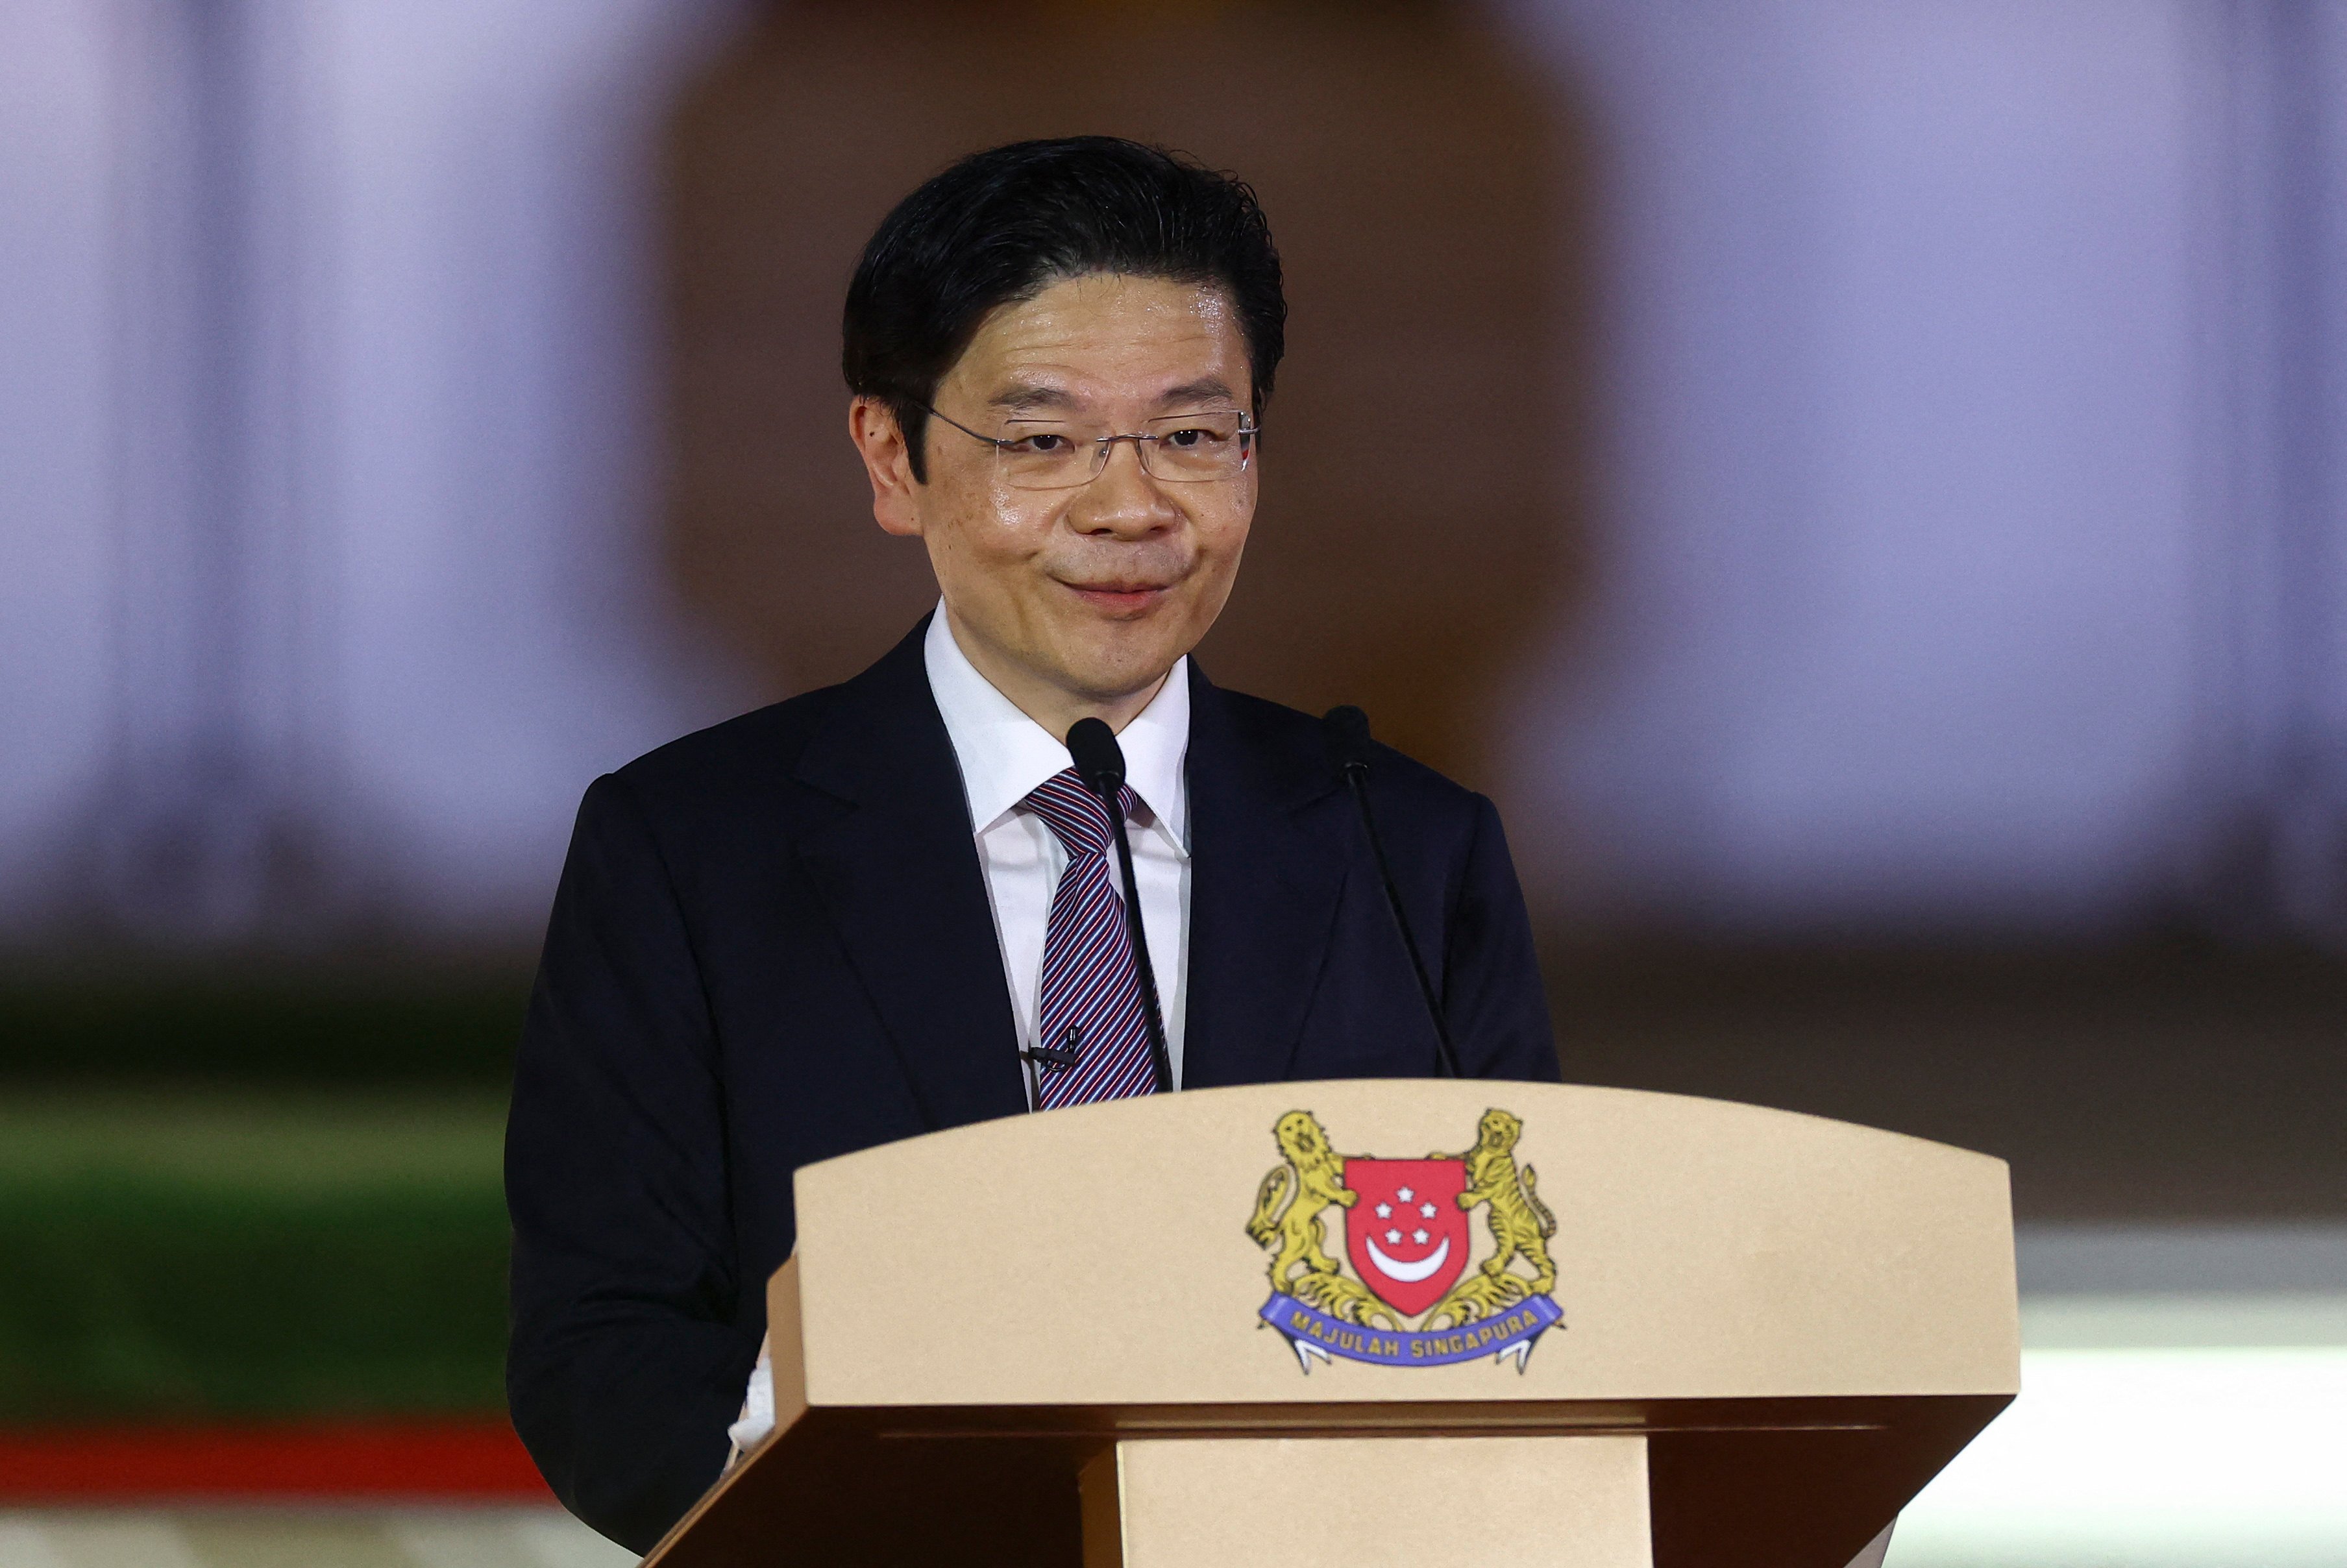 Singapore’s new leader Lawrence Wong makes a speech after being sworn in at the Istana. Photo: AFP